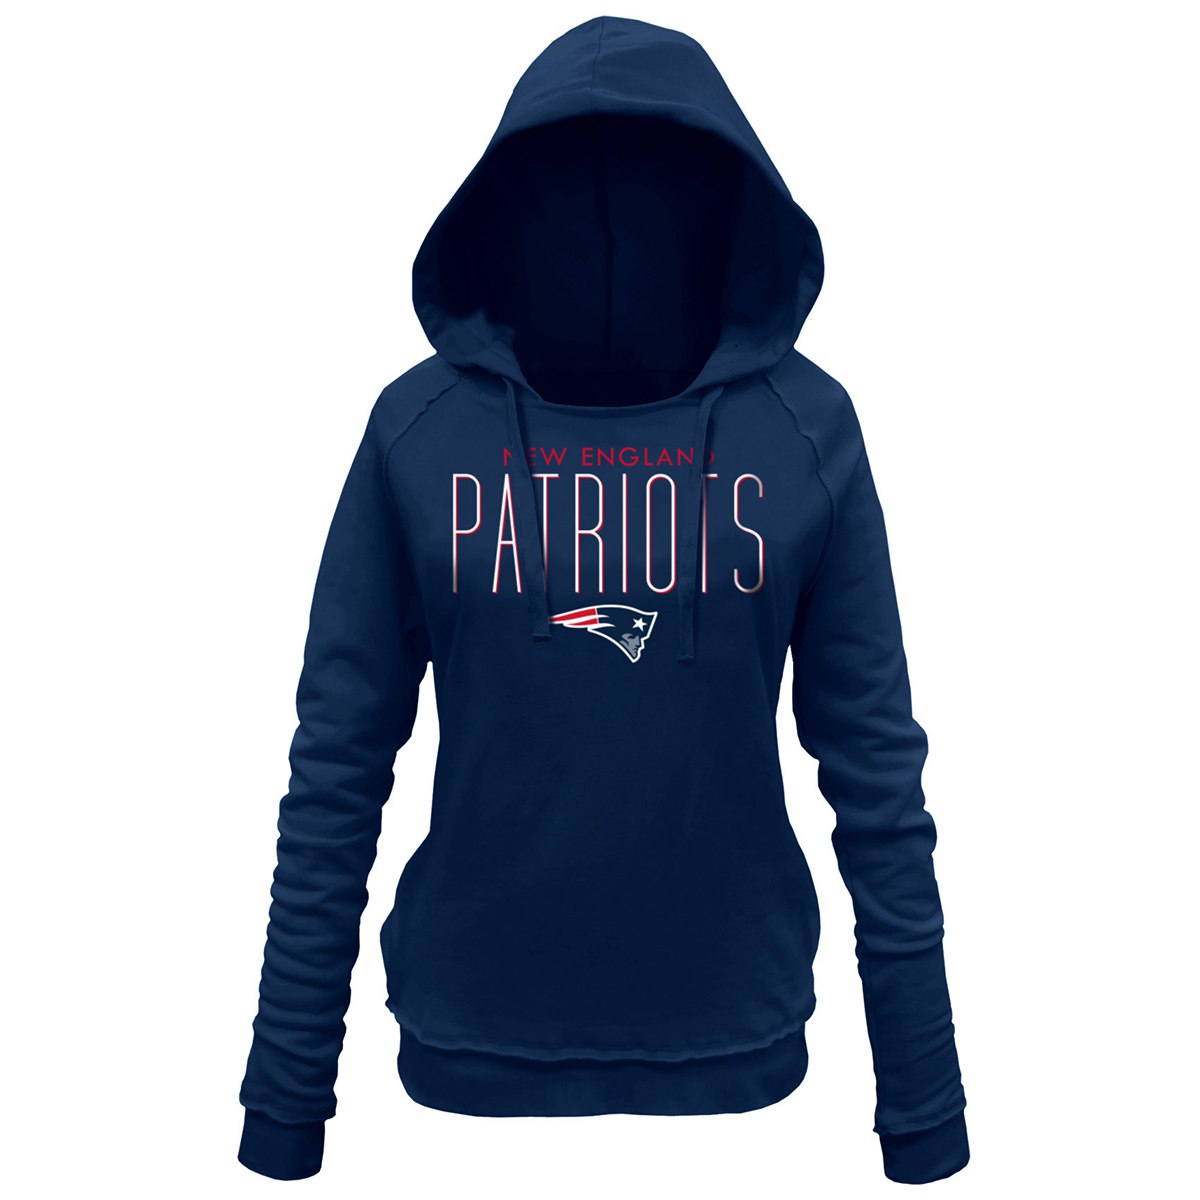 New England Patriots Women's Pullover Hoodie